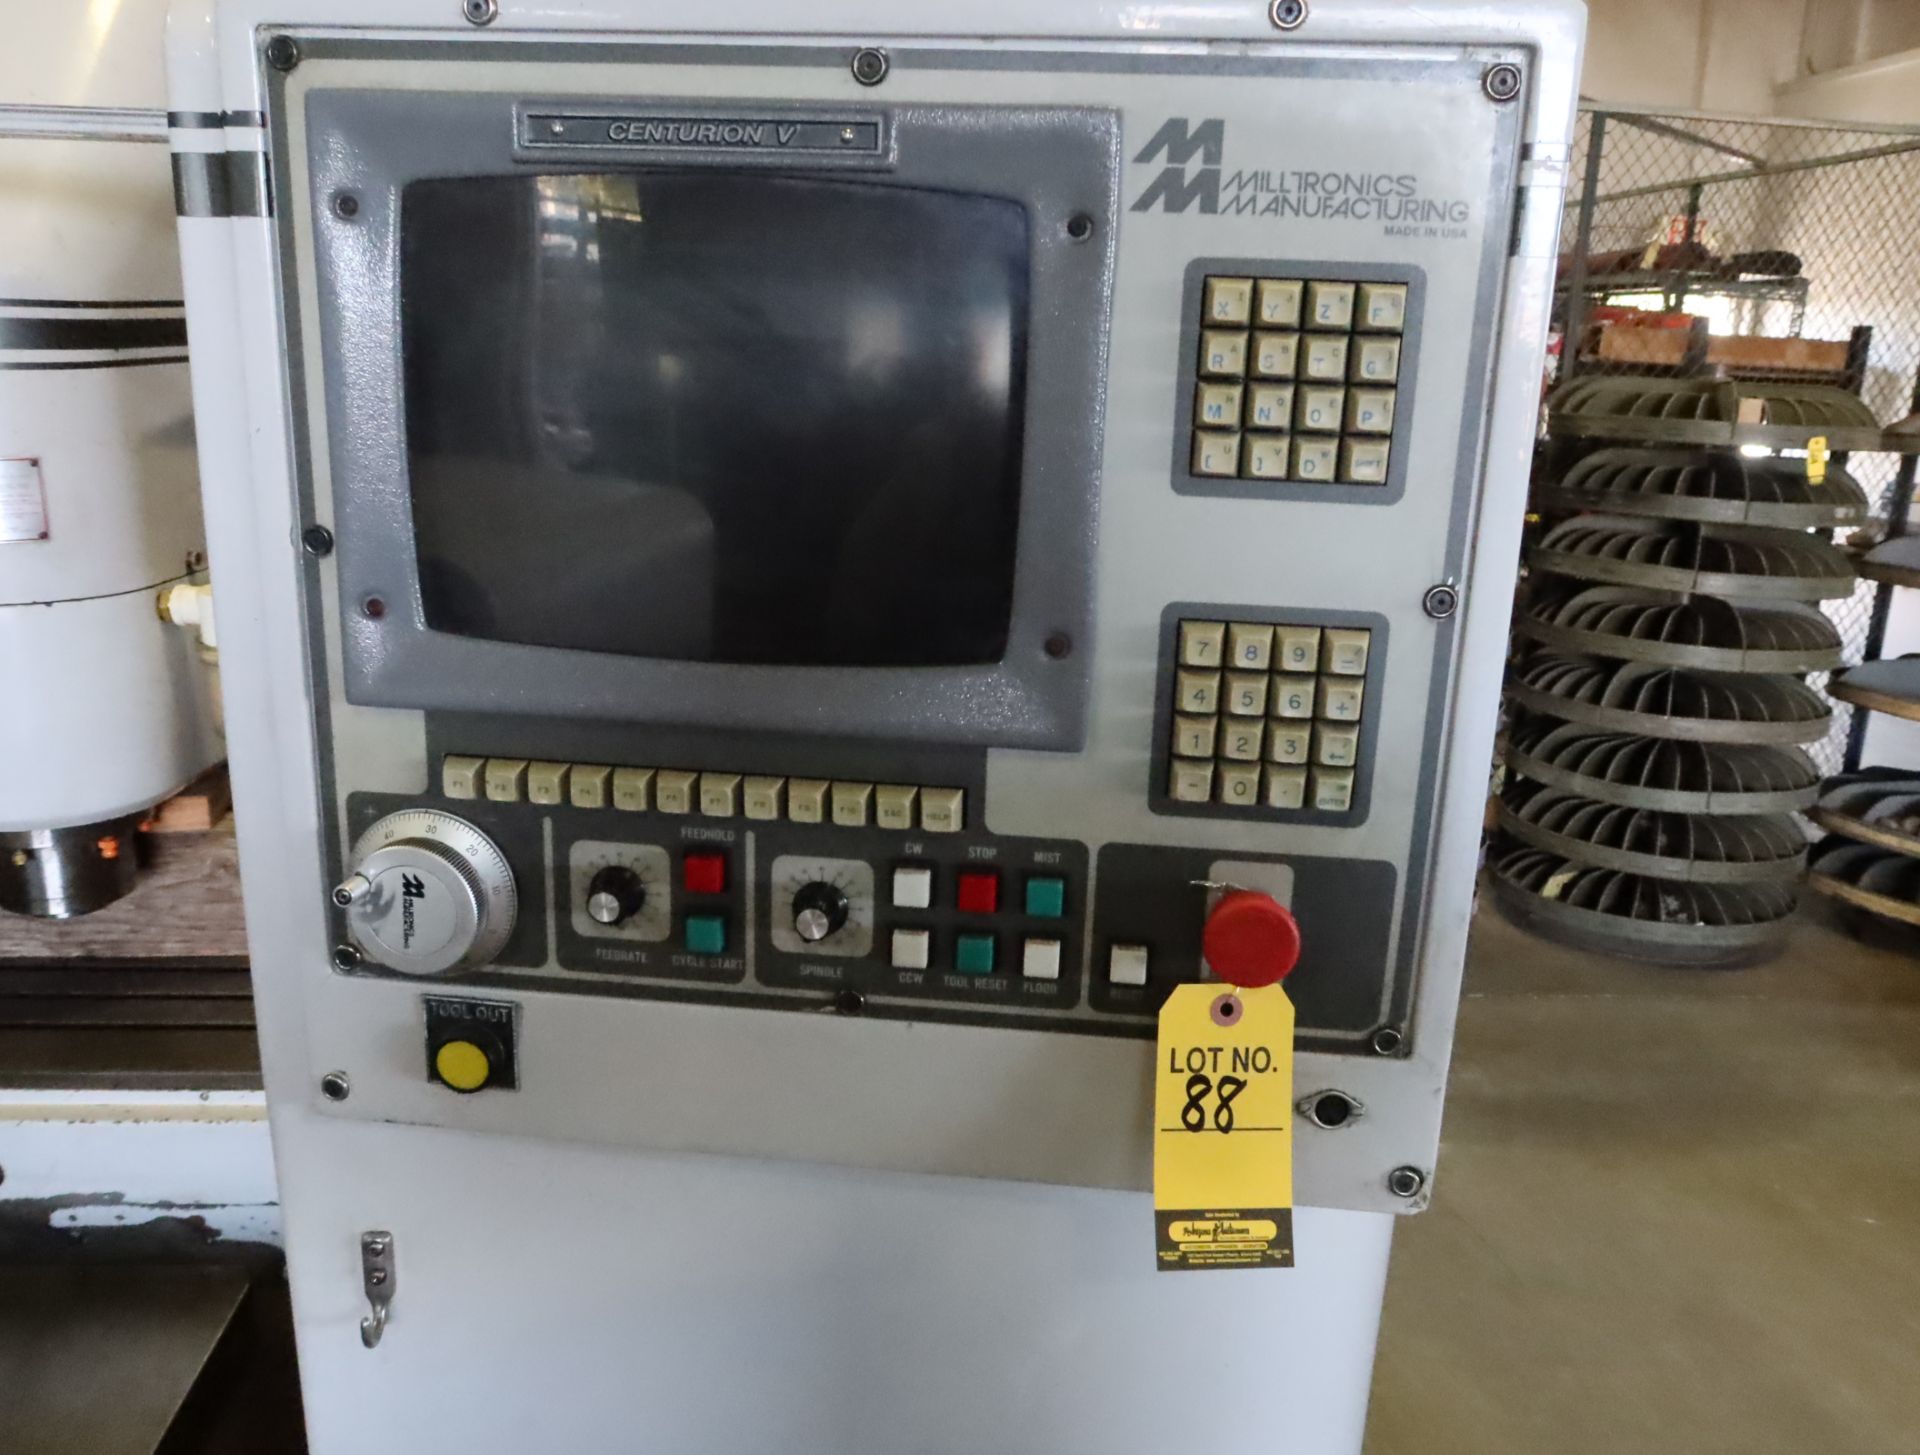 MILTRONICS VM16 CNC VERTICAL MACHINING CENTER, C-5 CONTROL, SN. 3866, COMPLETELY FUNCTIONAL MACHINE, - Image 3 of 4